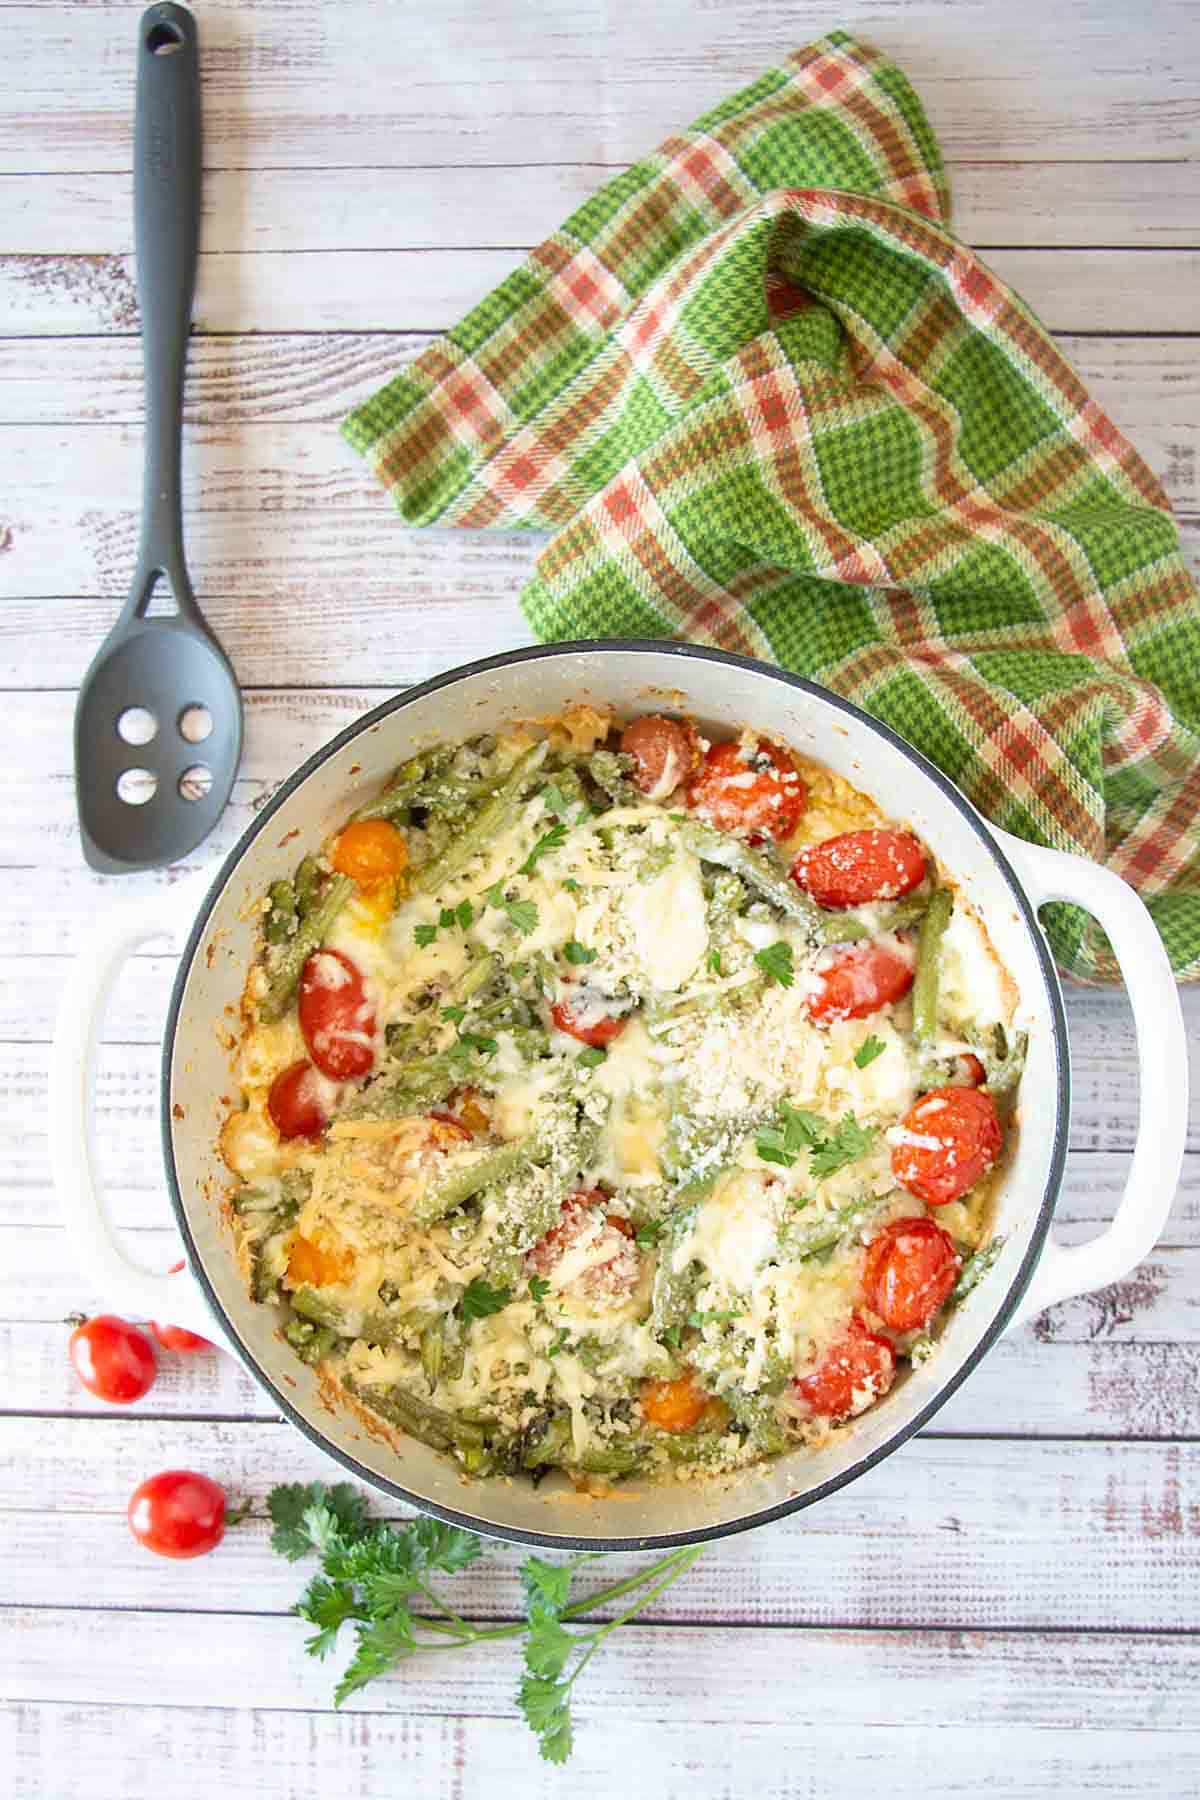 Cheesy green bean casserole with cherry tomatoes